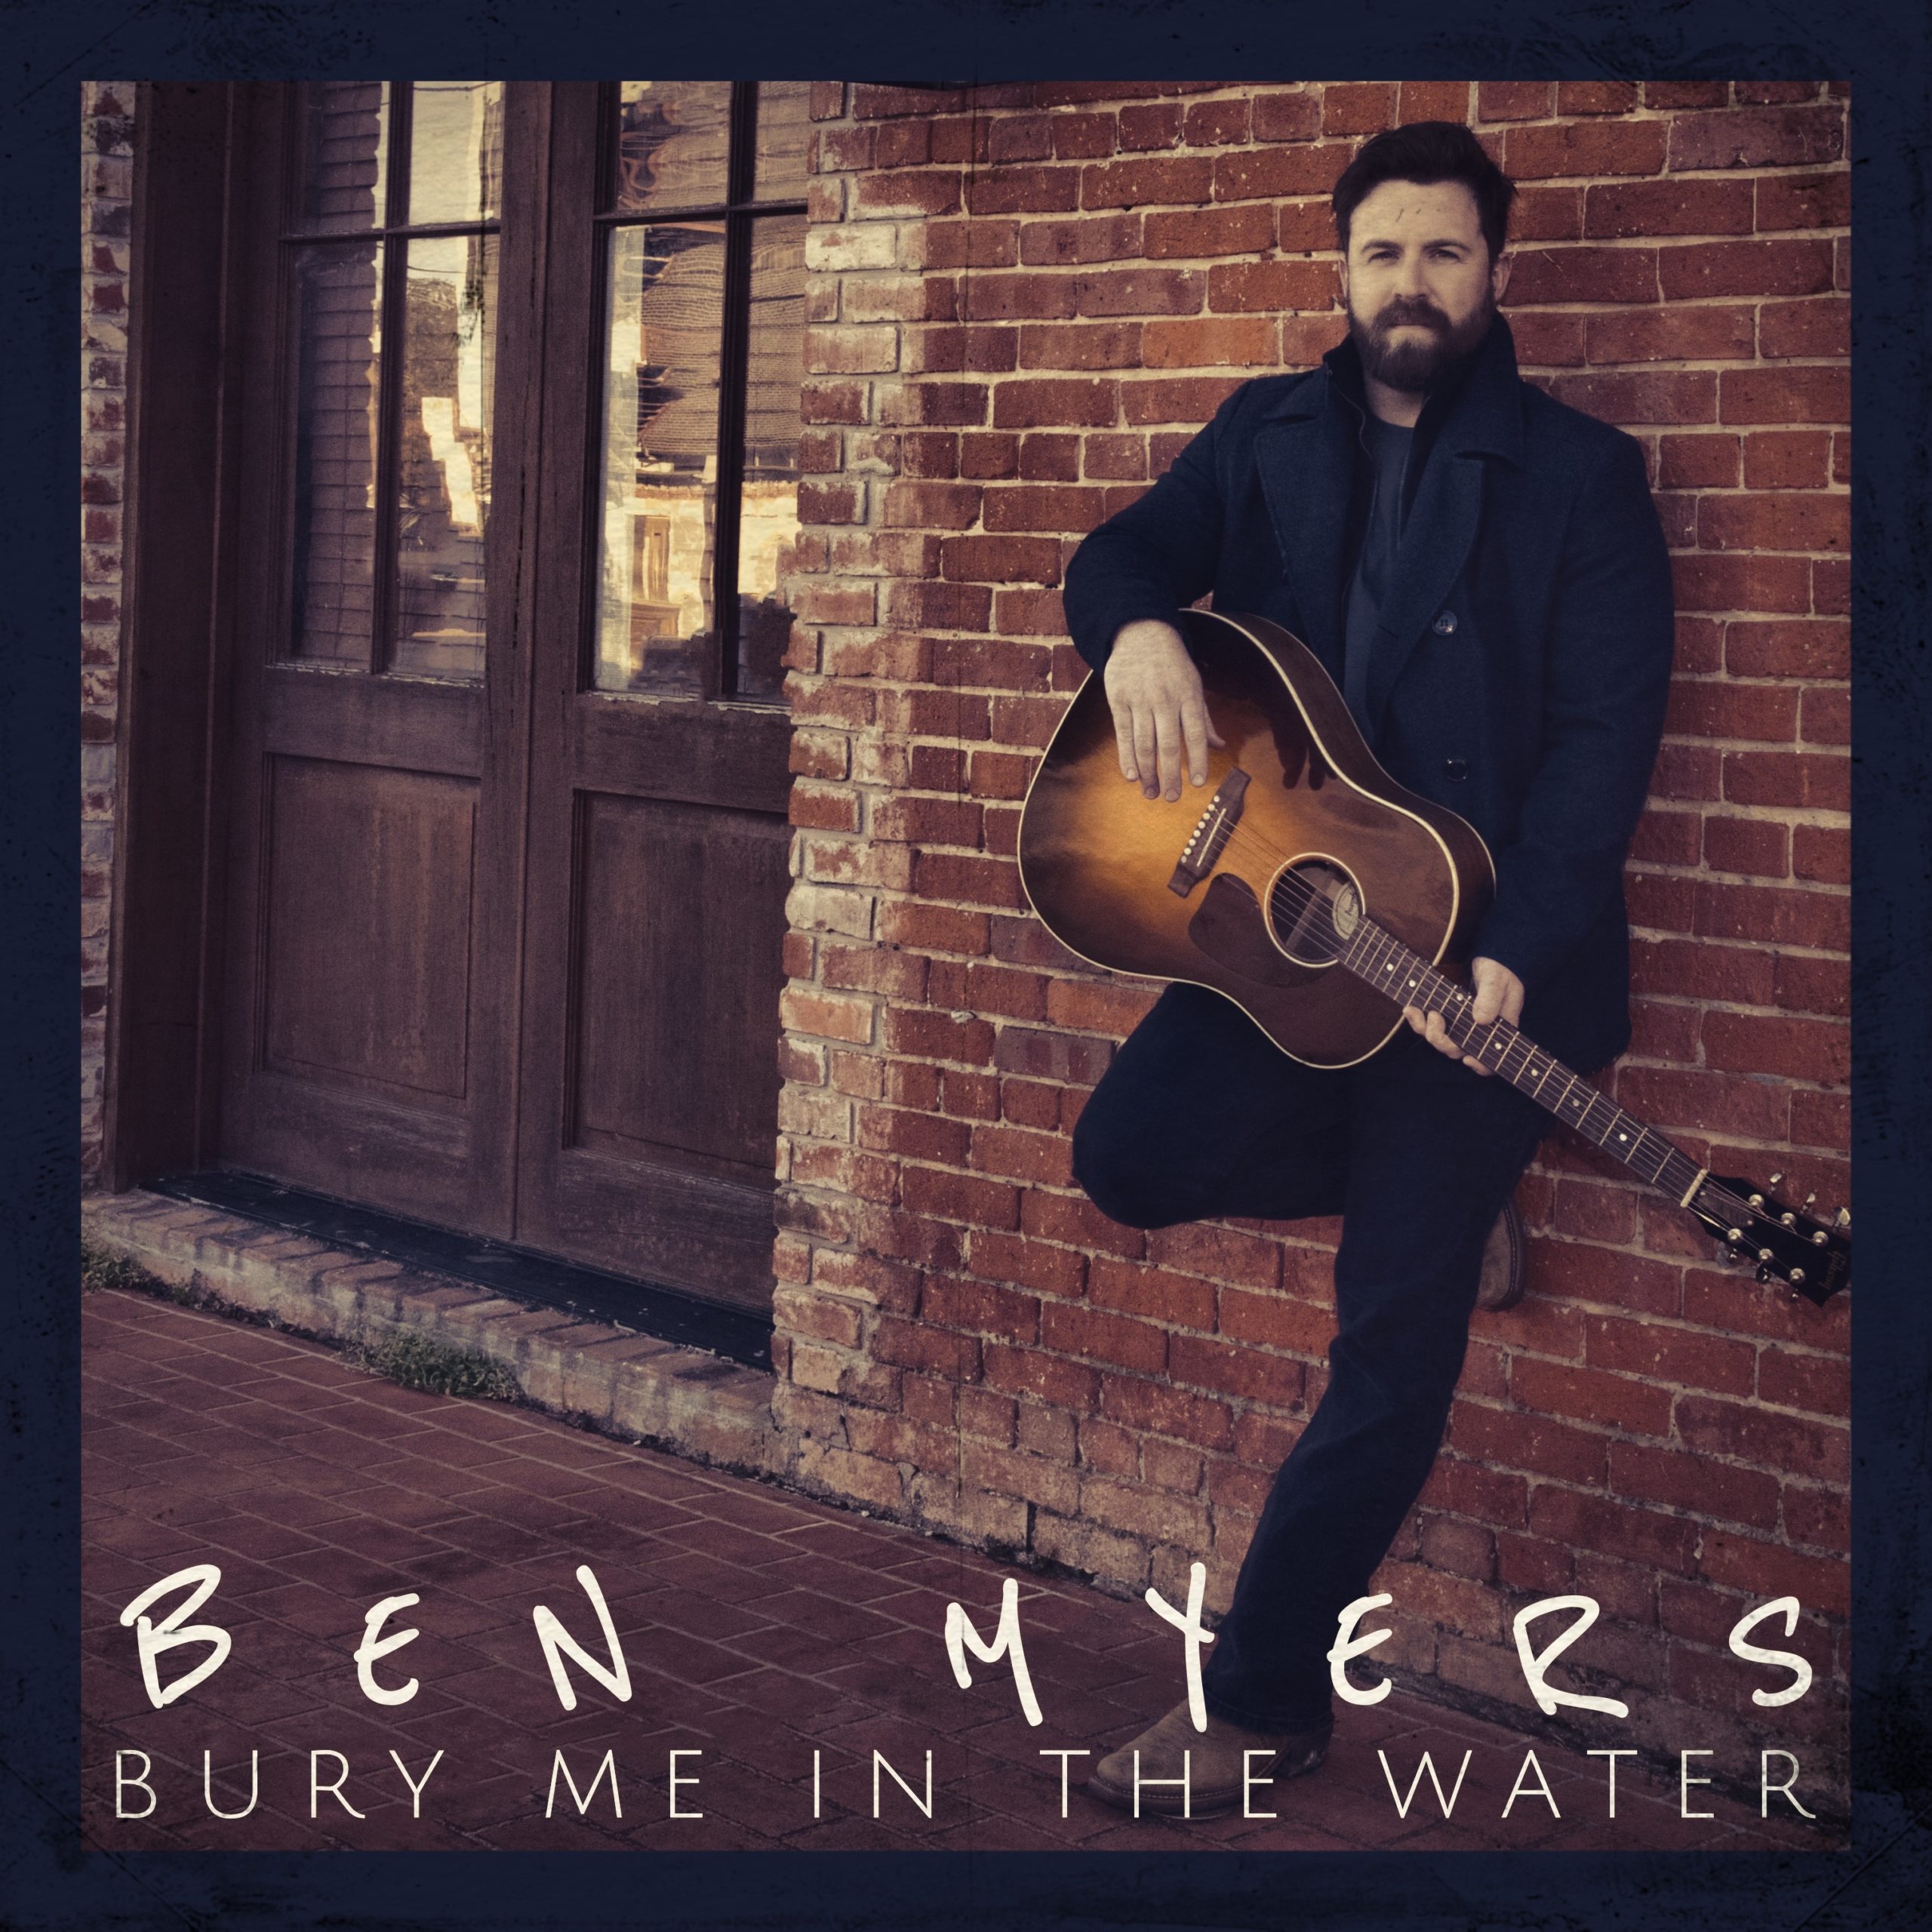 BEN MYERS RELEASES ‘BURY ME IN THE WATER’ TODAY